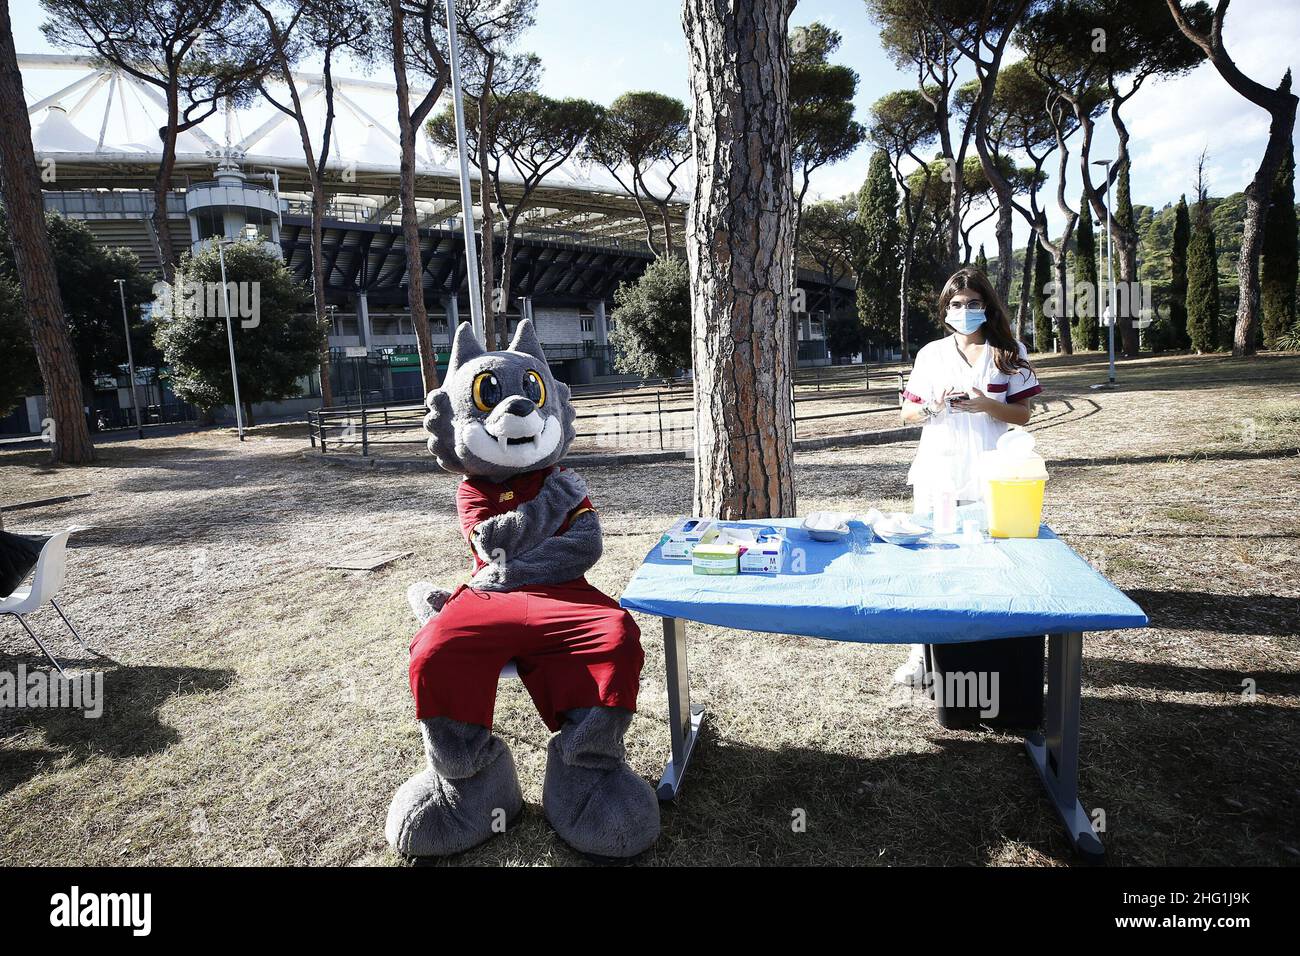 Cecilia Fabiano/ LaPresse September 22, 2021 Rome (Italy) News : Covid vaccination in front of Olimpico stadium for Roma fans In the Pic : the vaccination site Stock Photo